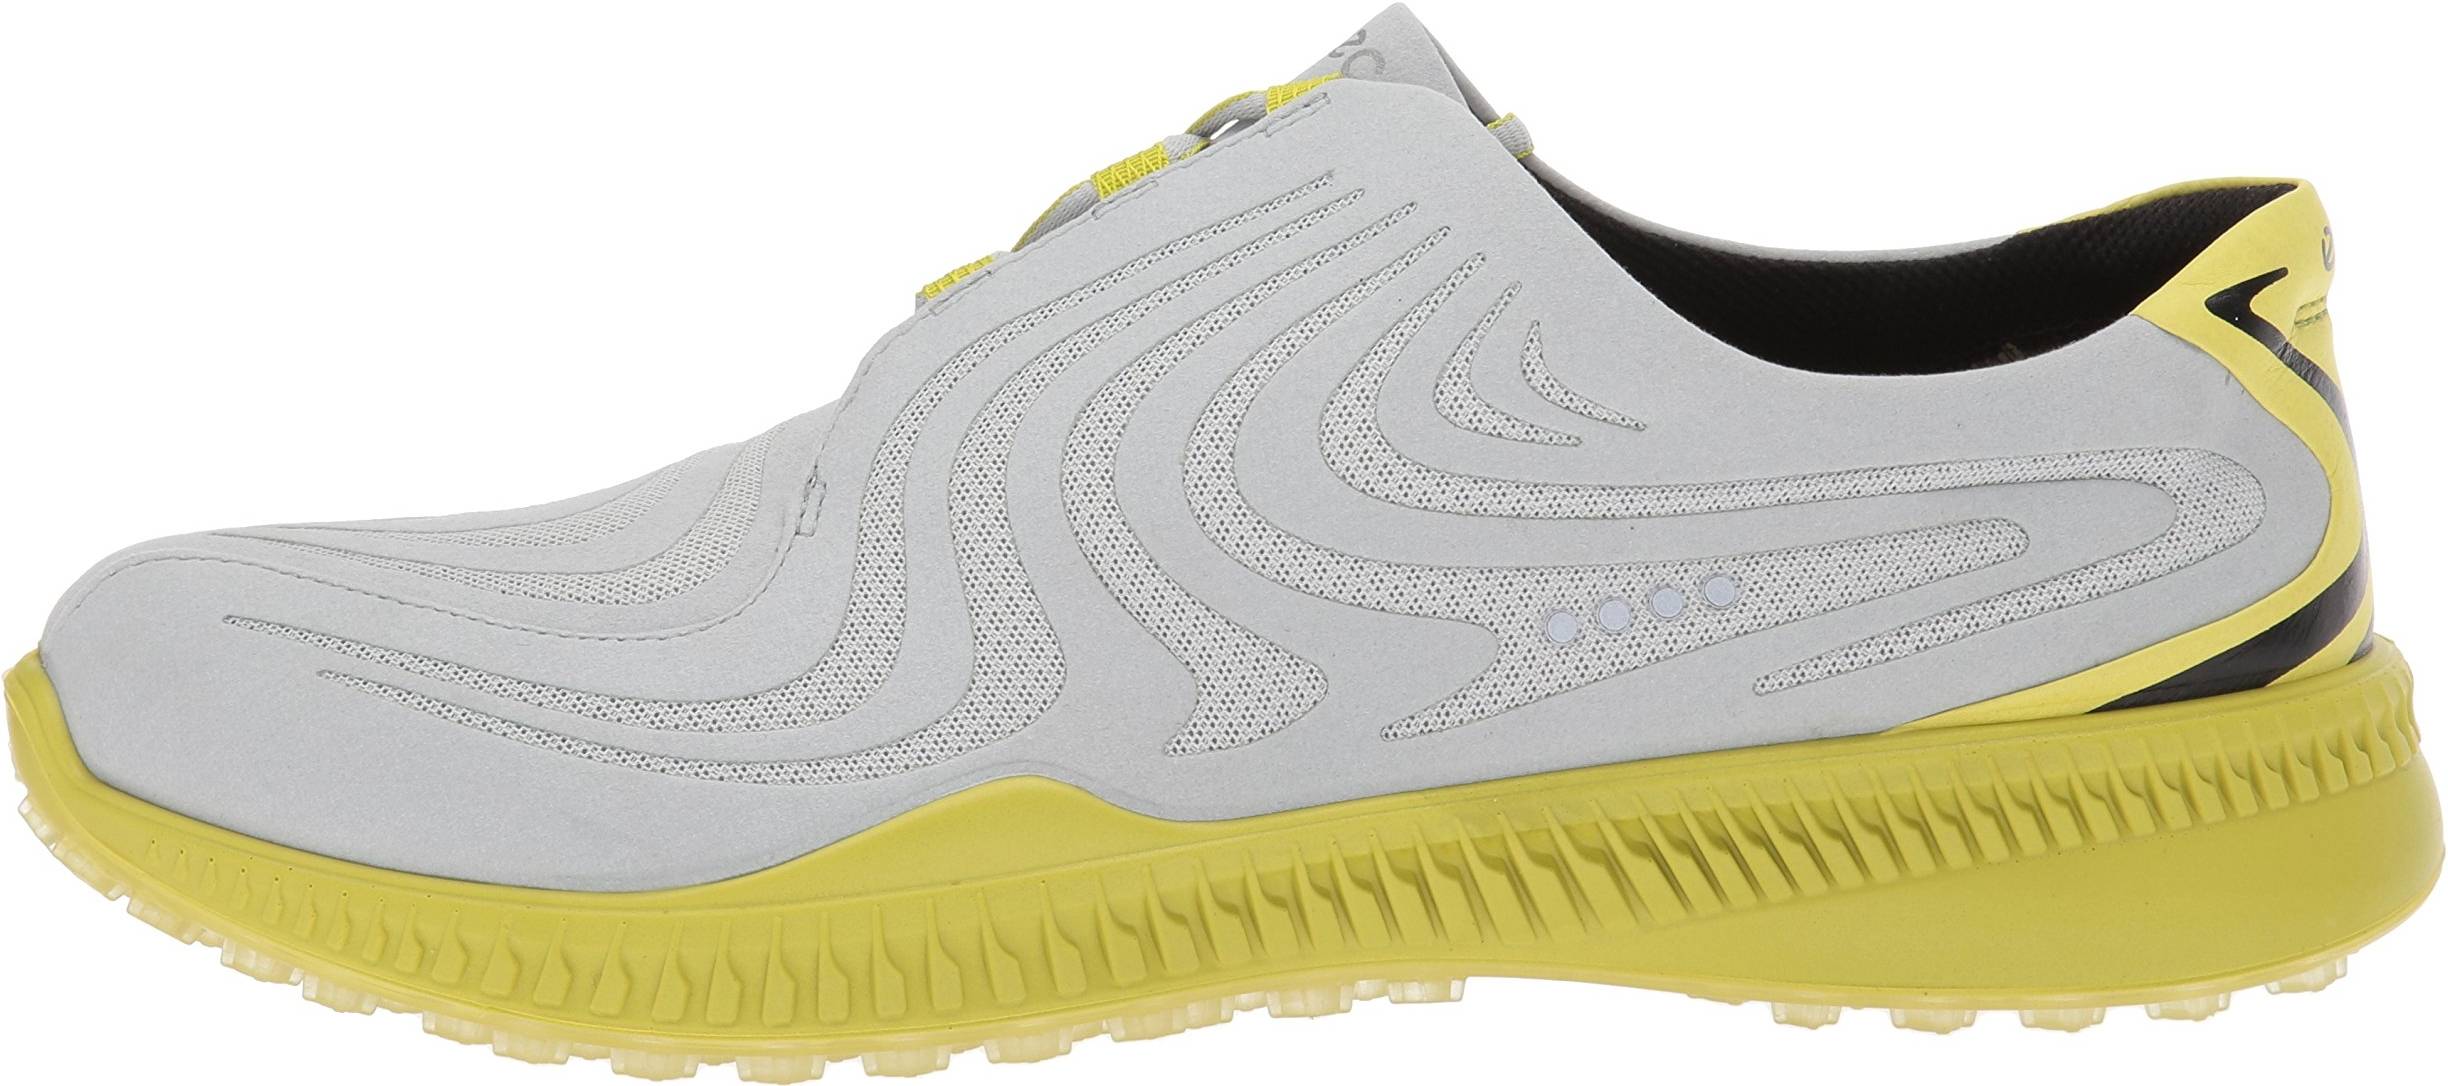 ecco golf shoes blisters